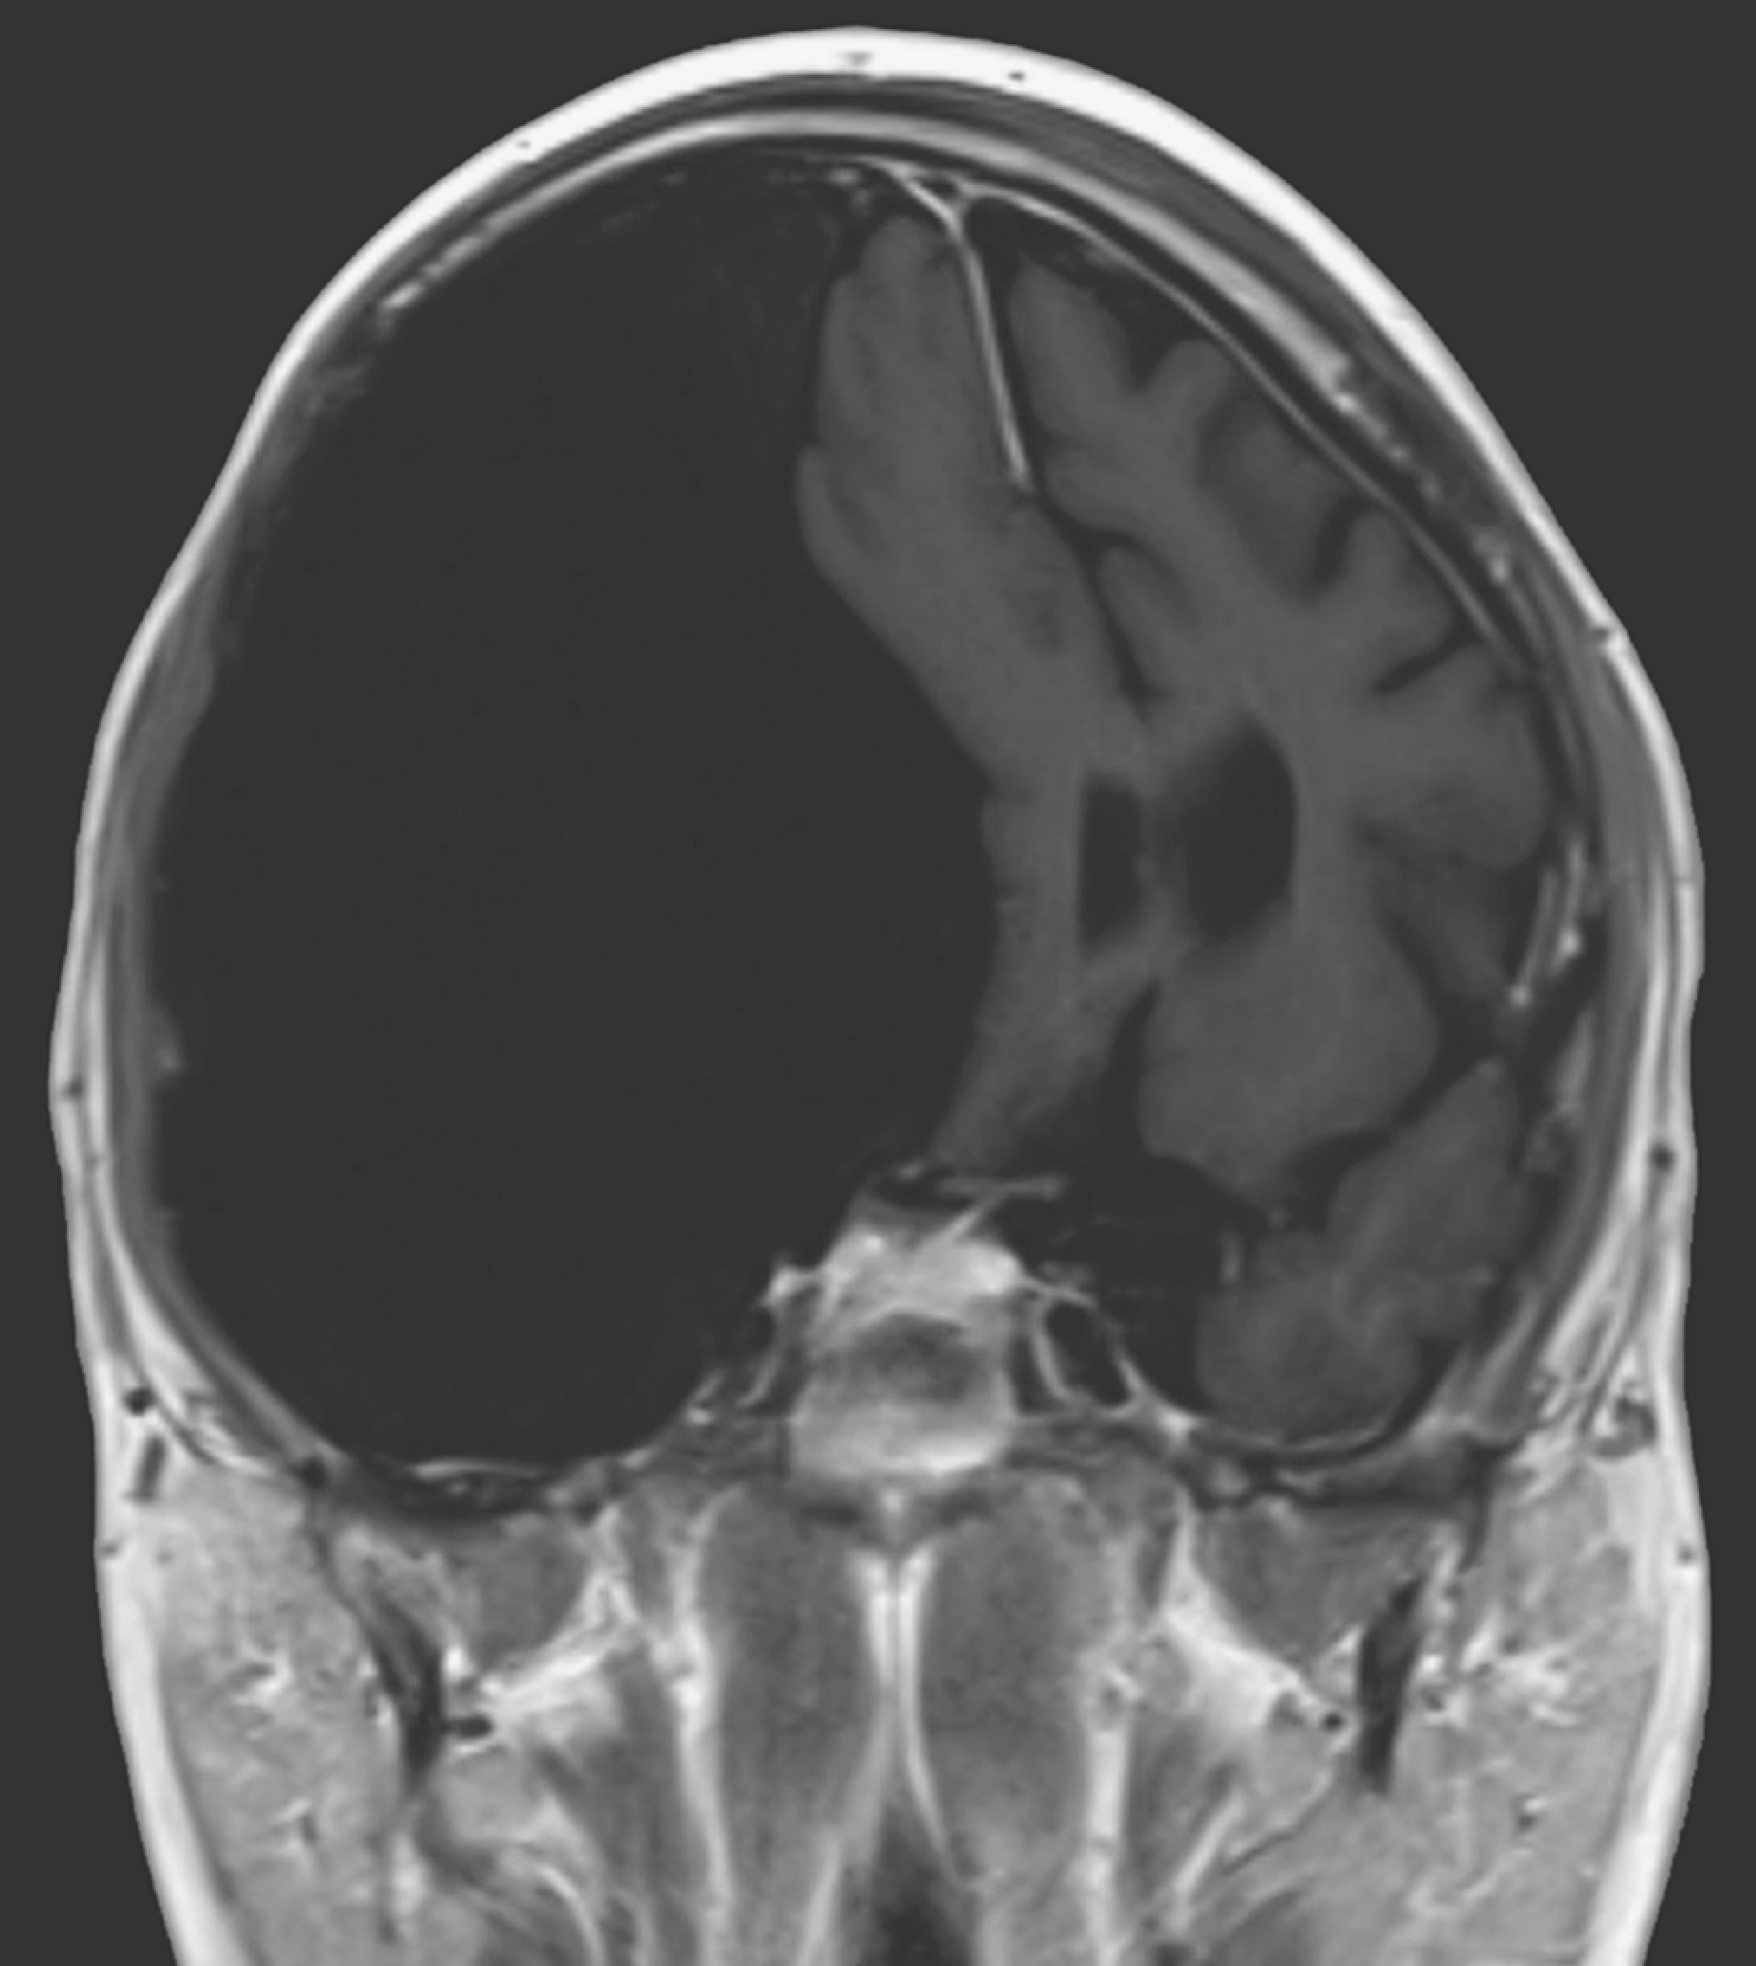 Leggett's arachnoid cyst is thought to be one of the largest ever recorded by doctors.  (Image: Jennifer de Longpre, New England Journal of Medicine)